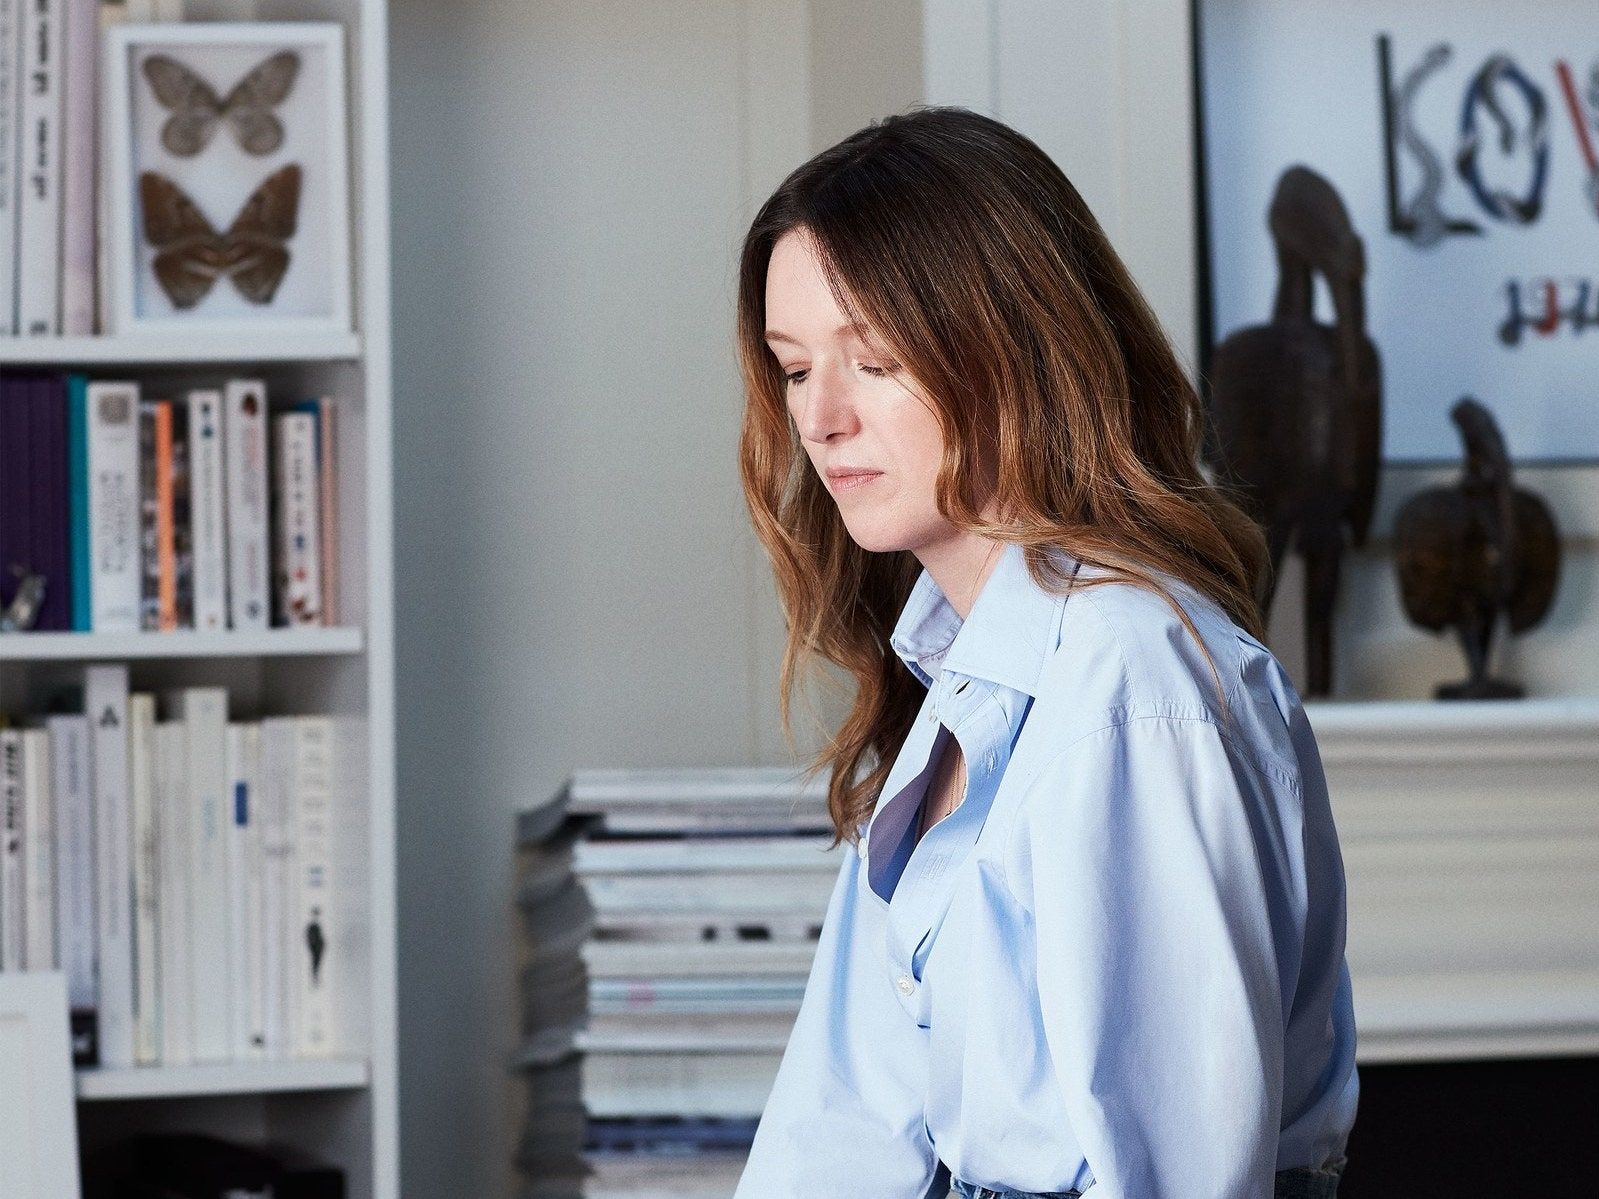 clare waight keller for givenchy